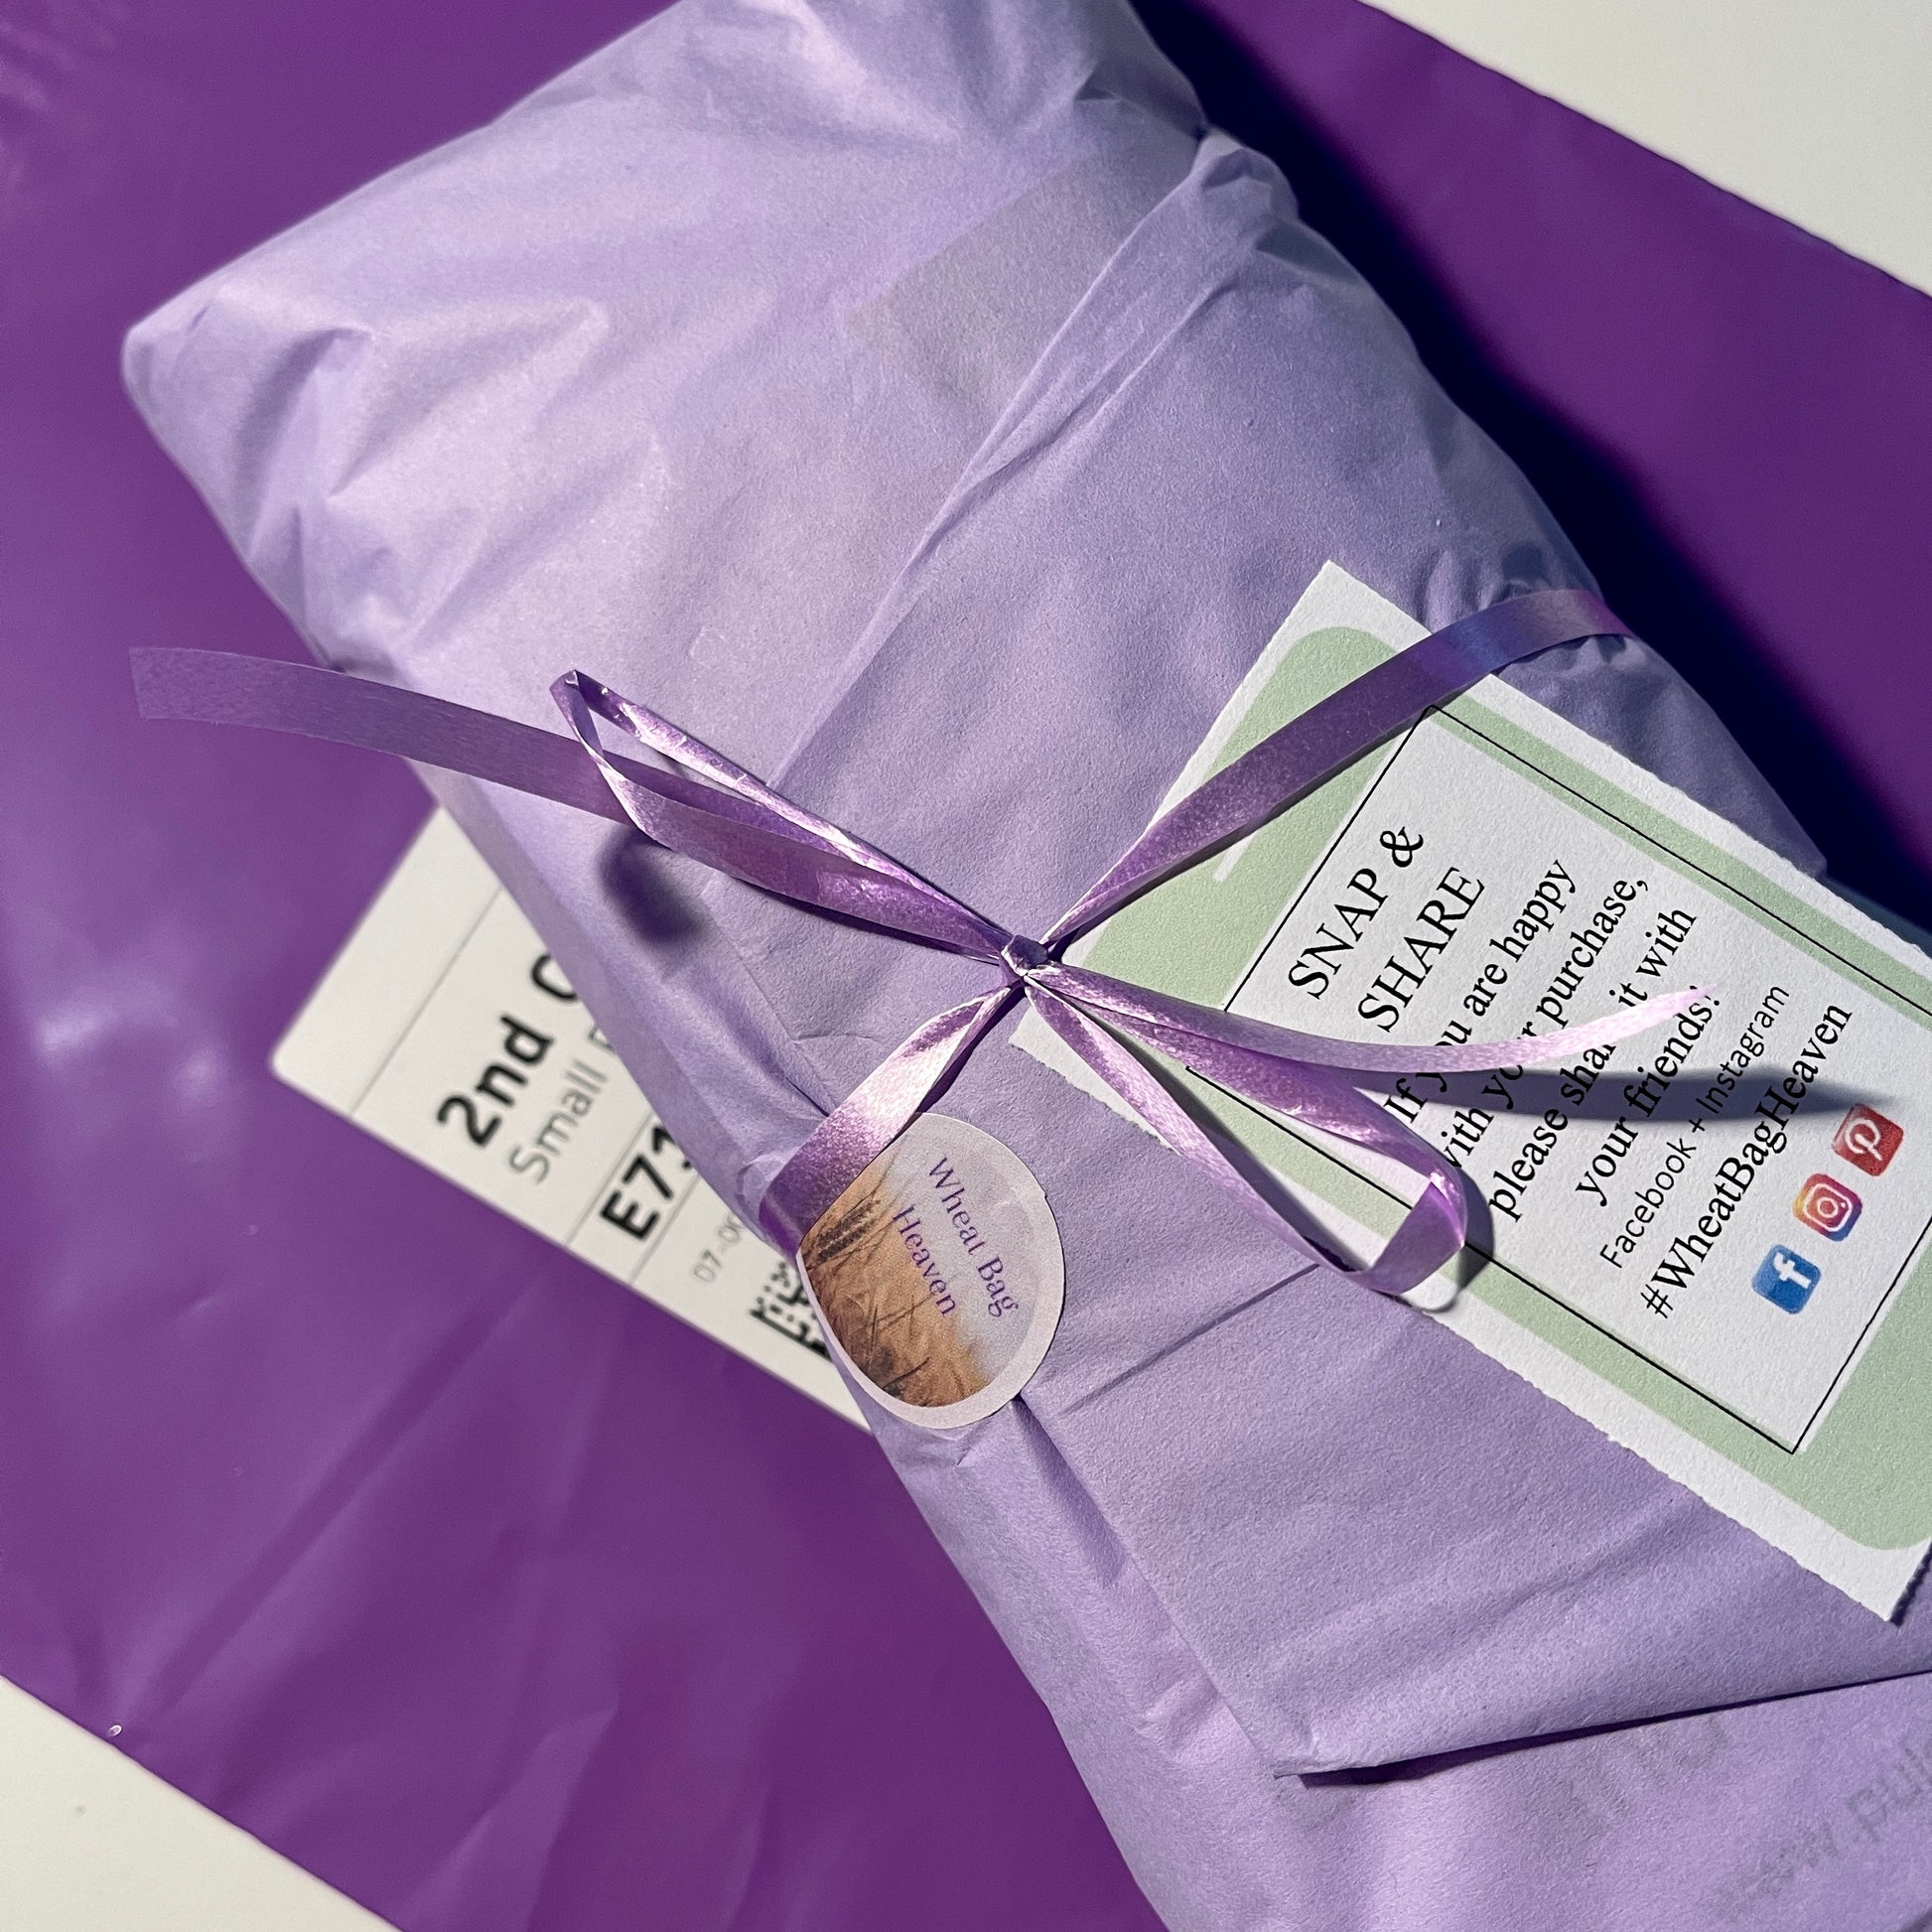 Wheat bag wrapped in lilac tissue paper tied with purple ribbon with a call to action card. Wheat bag is sat on a purple recyclable postal bag